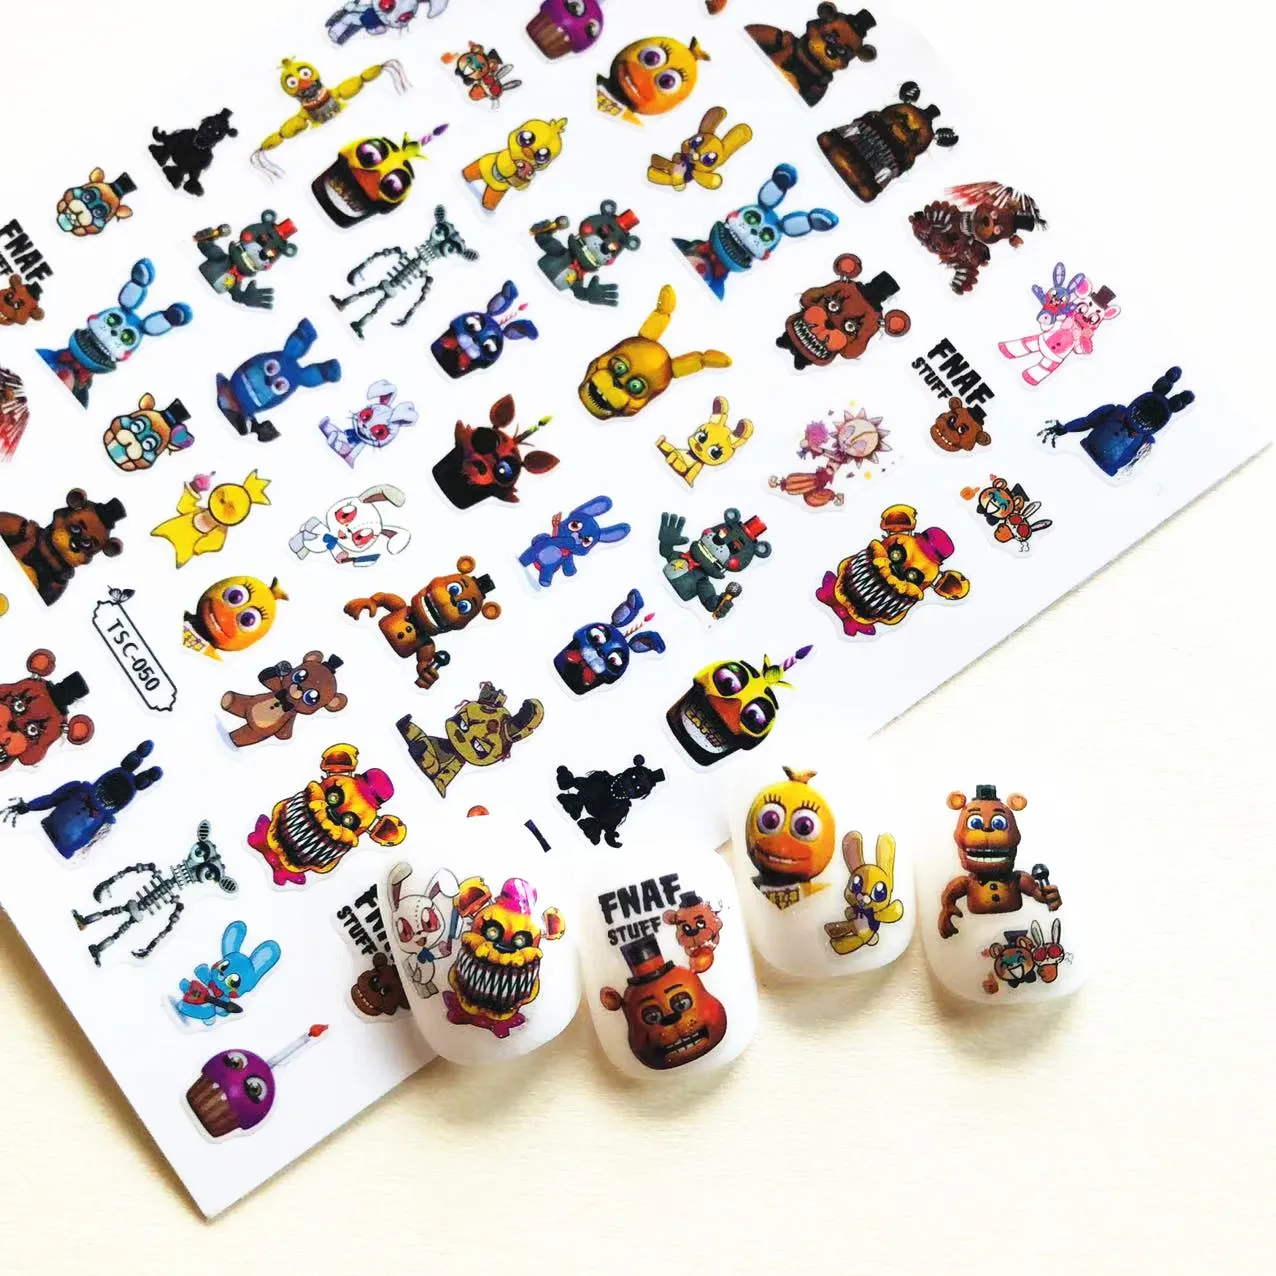 

TSC-50 FNAF GAME retro beauty Constellation 3d nail art stickers decal template diy nail tool decorations